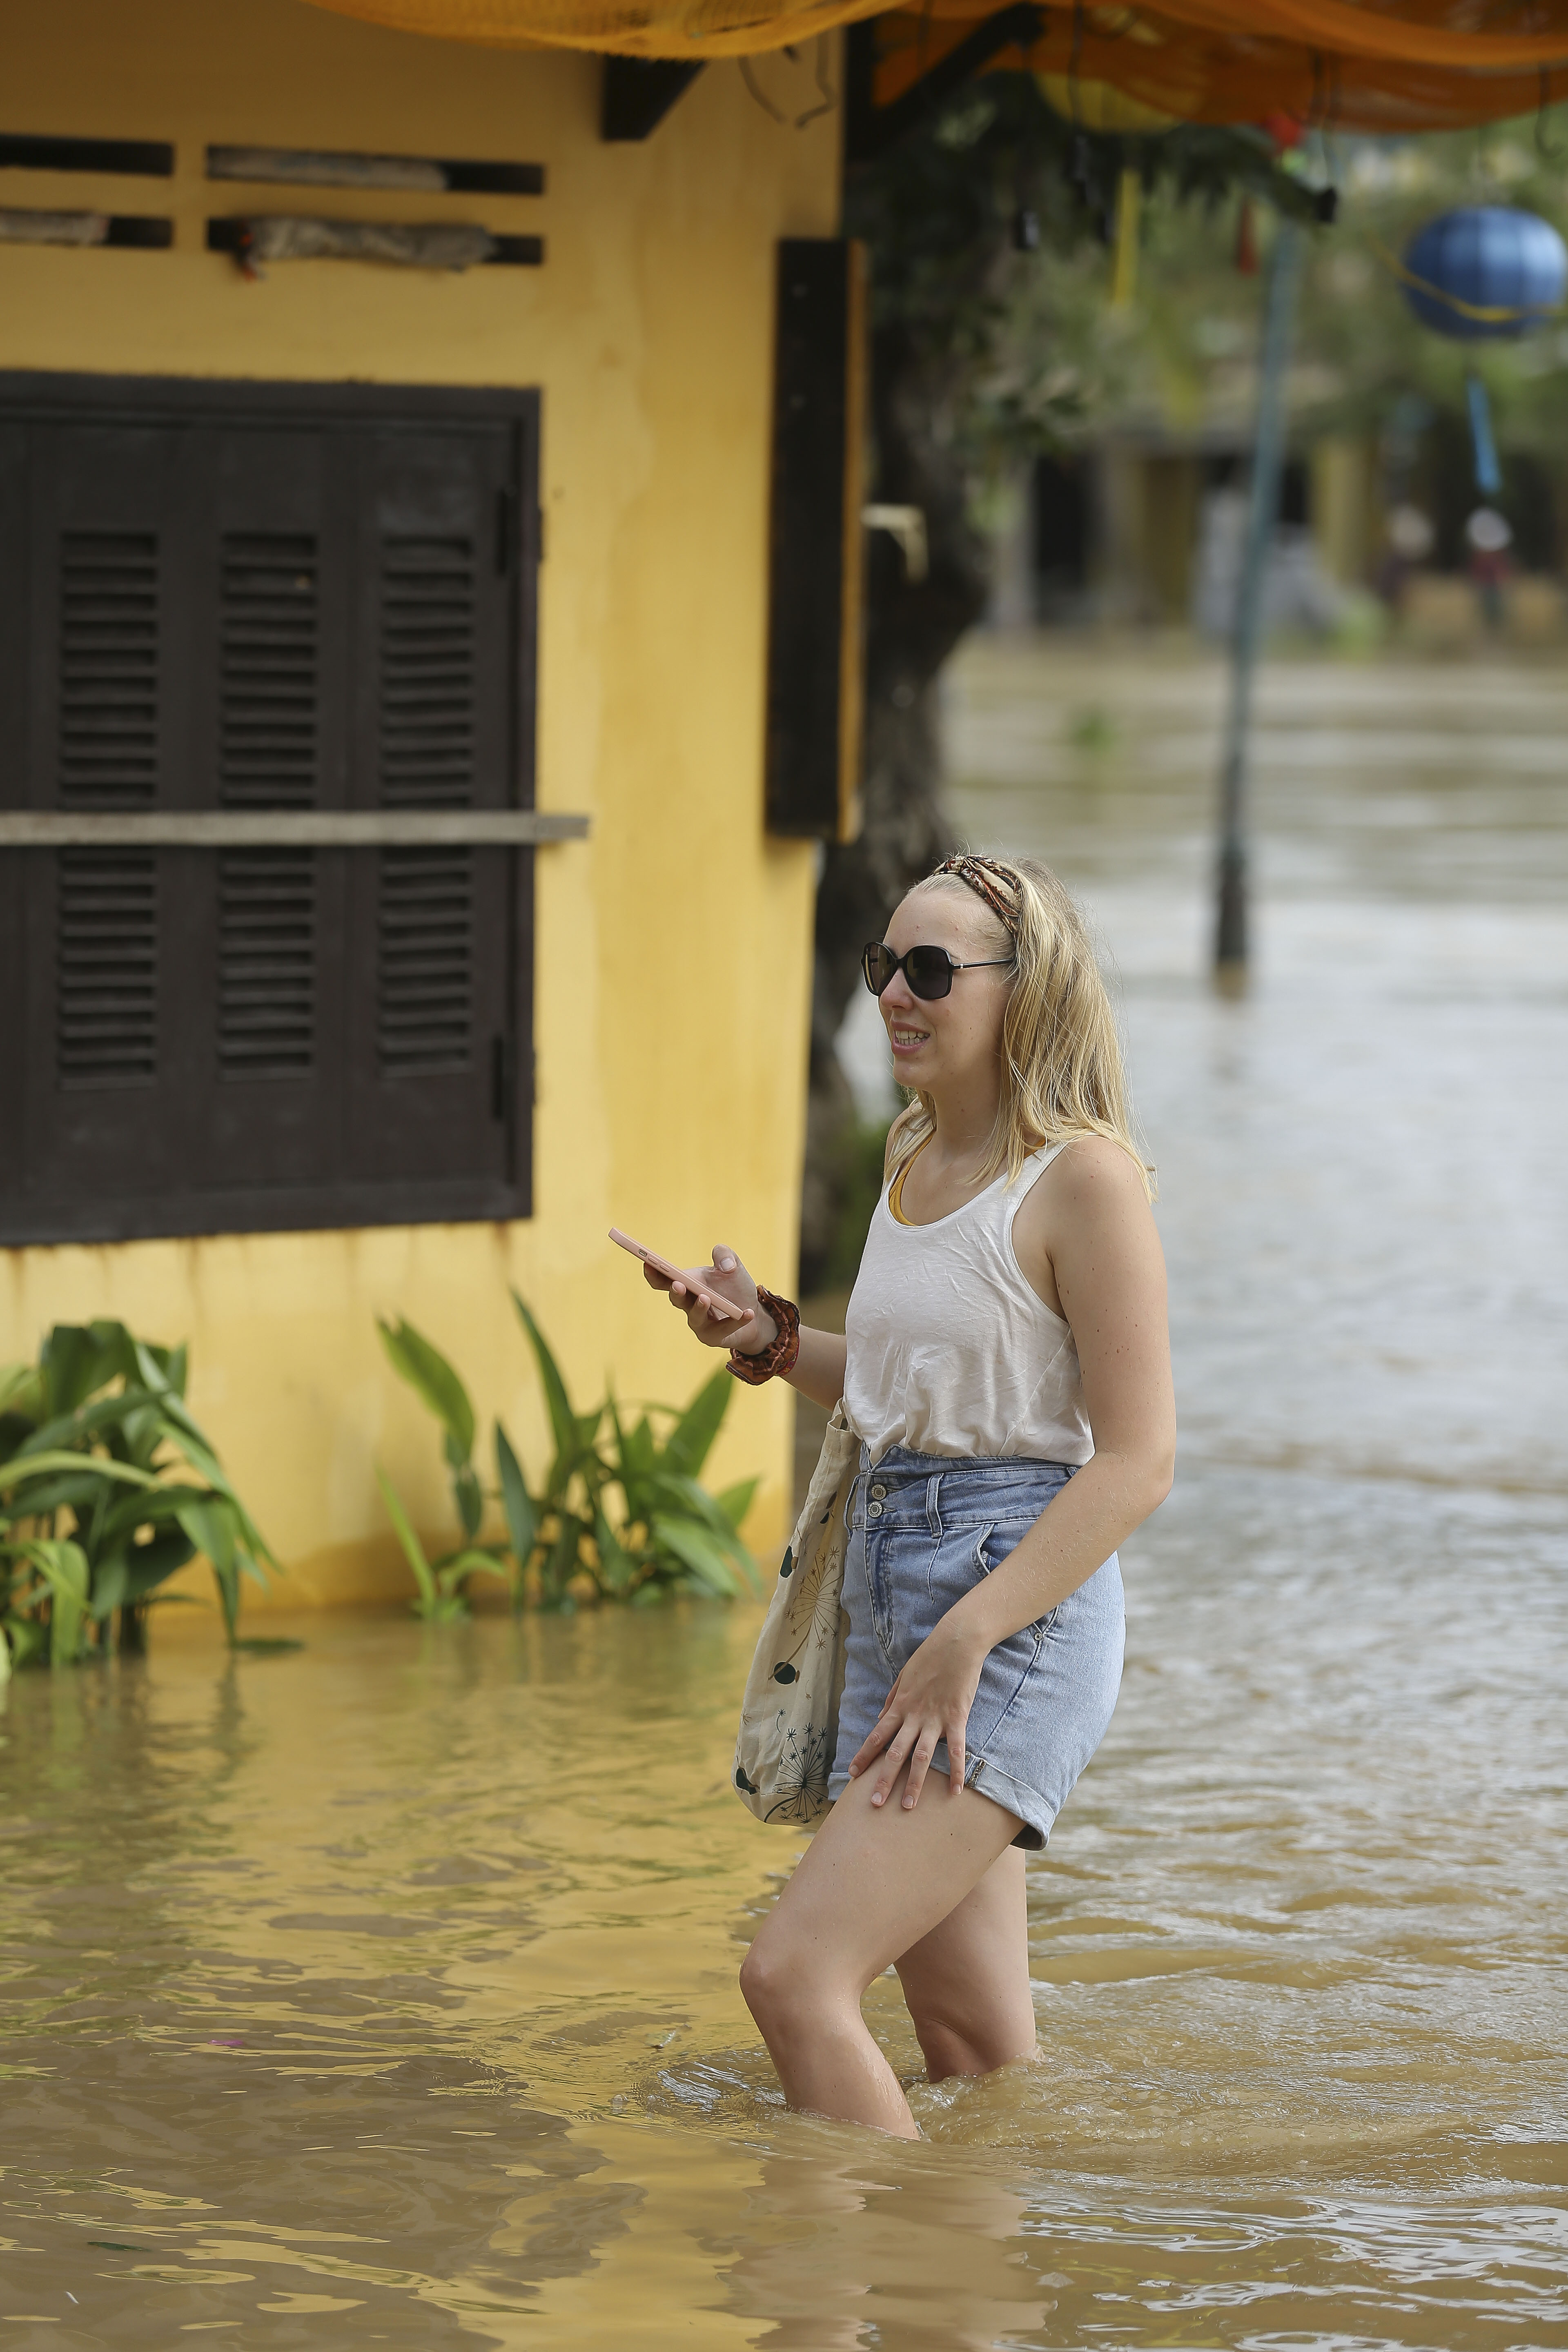 A female foreigner said that this is her most memorable experience in Hoi An.